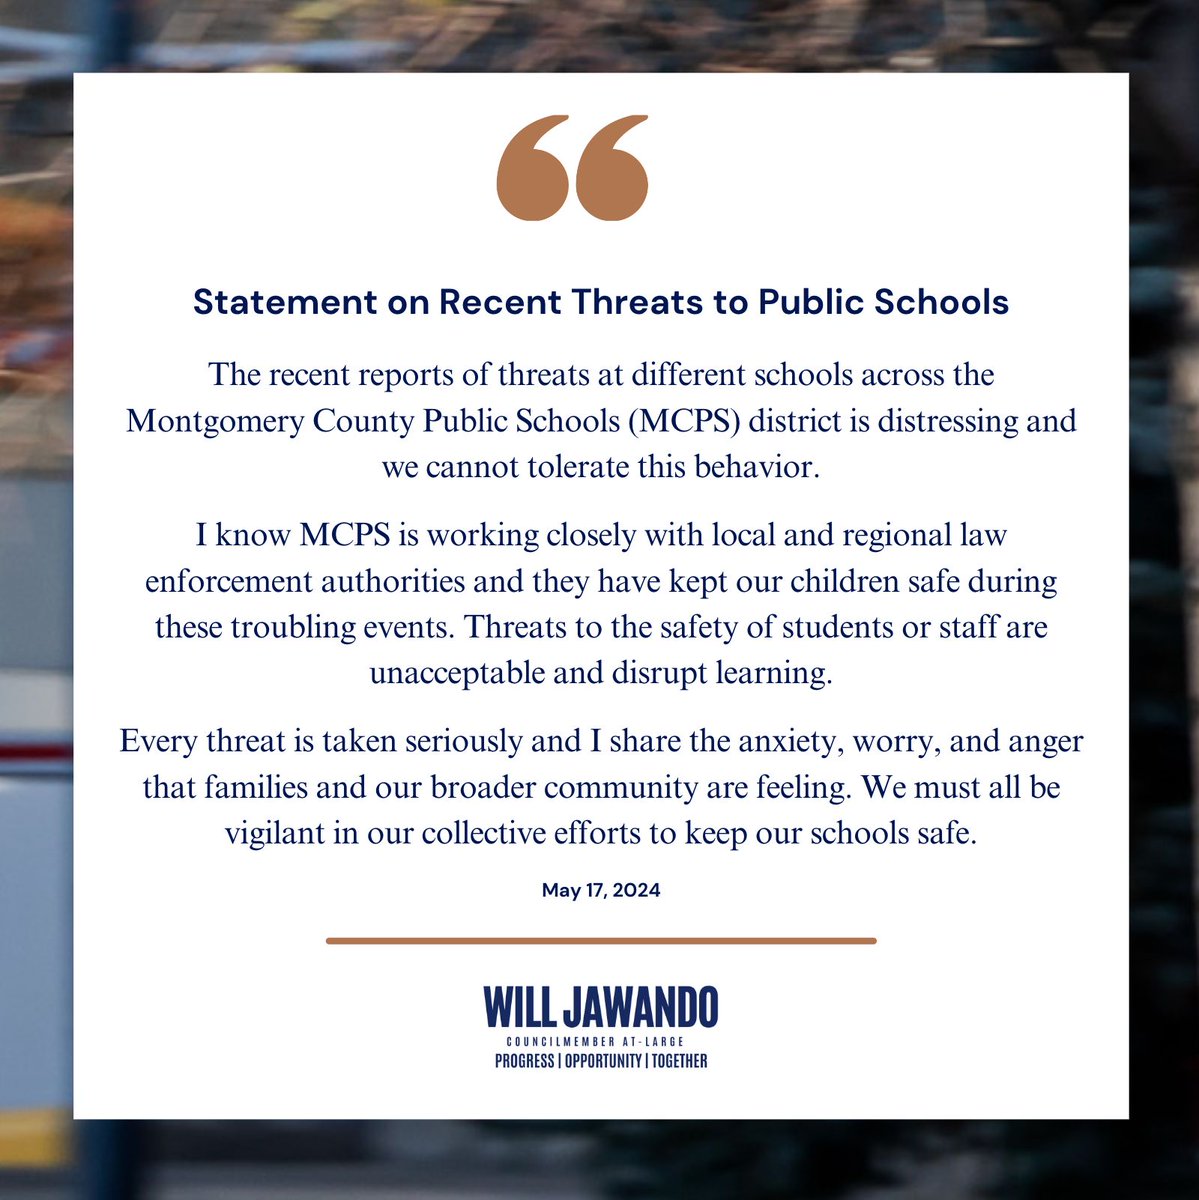 Every threat is taken seriously and I share the anxiety, worry, and anger that families and our broader community are feeling. We must all be vigilant in our collective efforts to keep our schools safe.